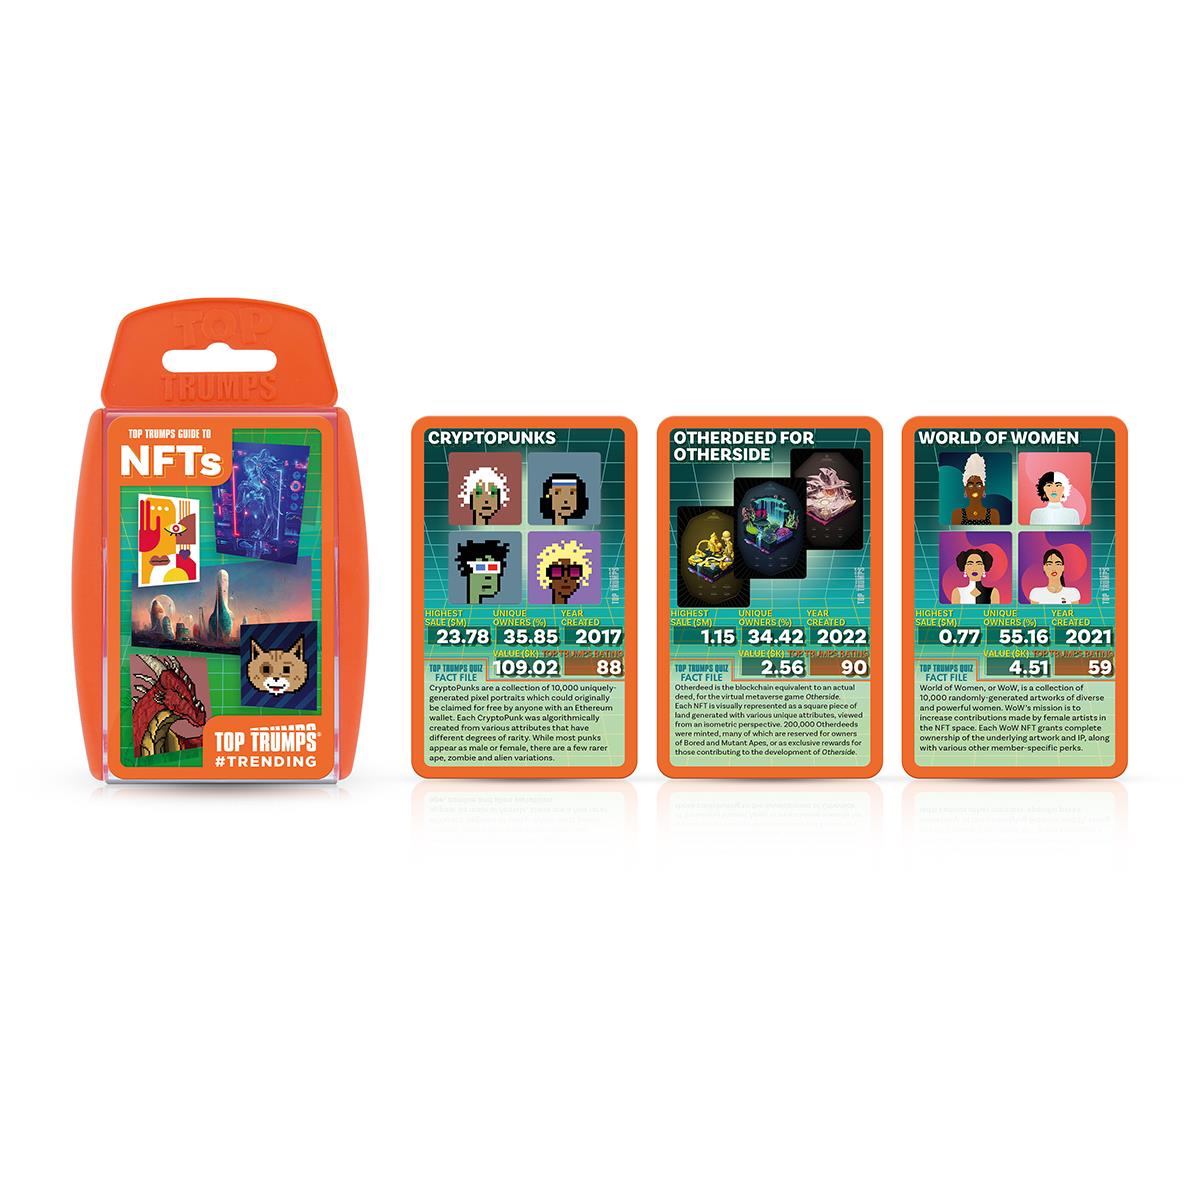 Top Trumps Gen Z - Guide to NFTs Card Game